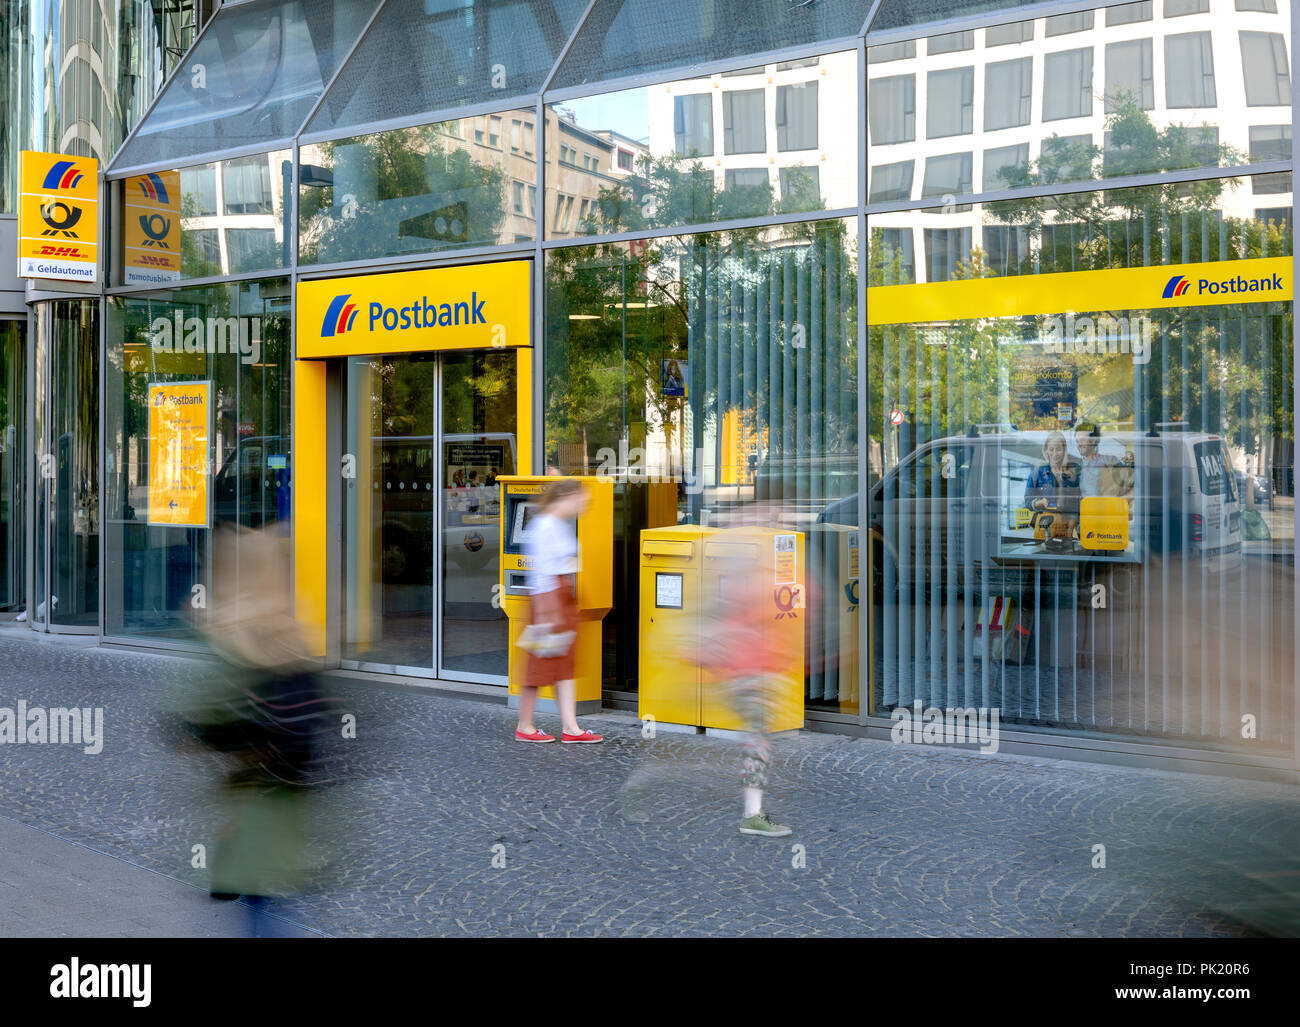 Frankfurt/Main, Germany - September 09, 2018: Postbank Office entrance with cash machine, letter box and blurred people in front Stock Photo